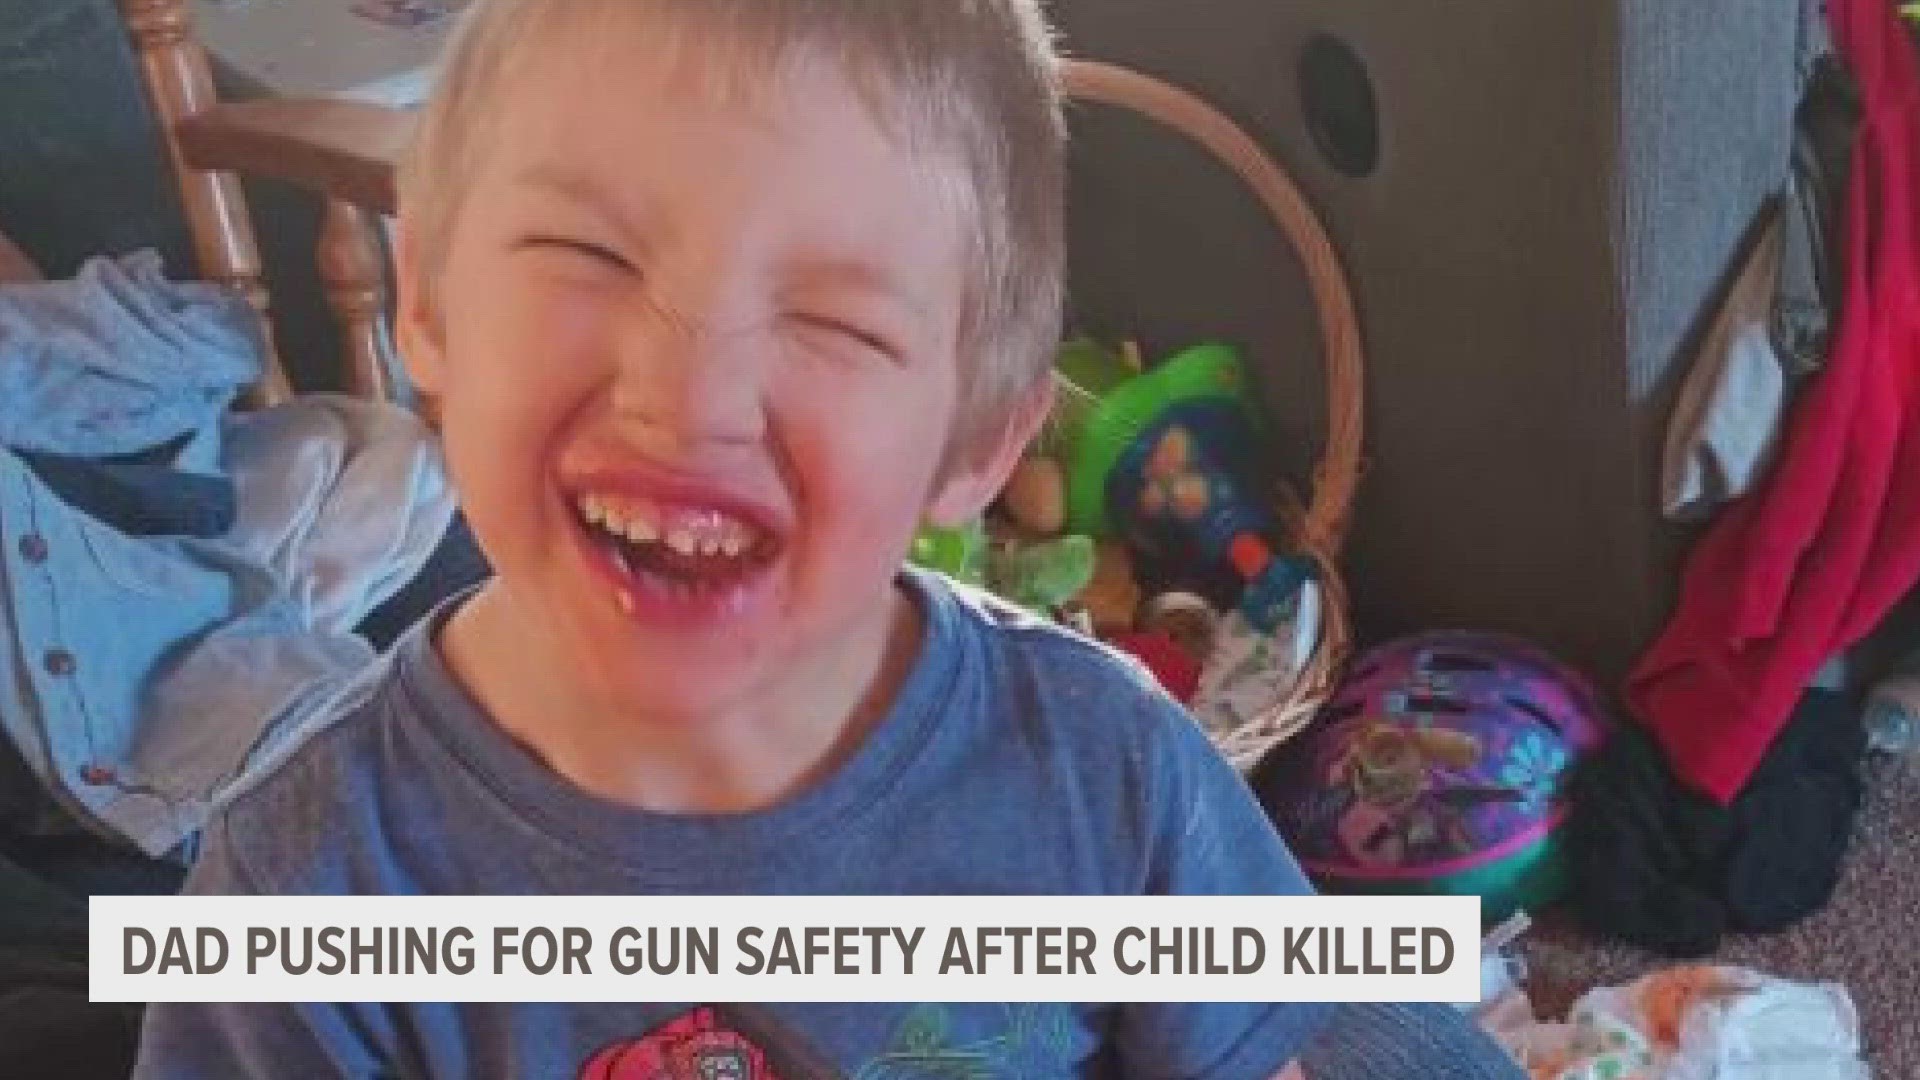 The boy's father said his death could have been prevented if the adults in the home had followed proper gun safety.